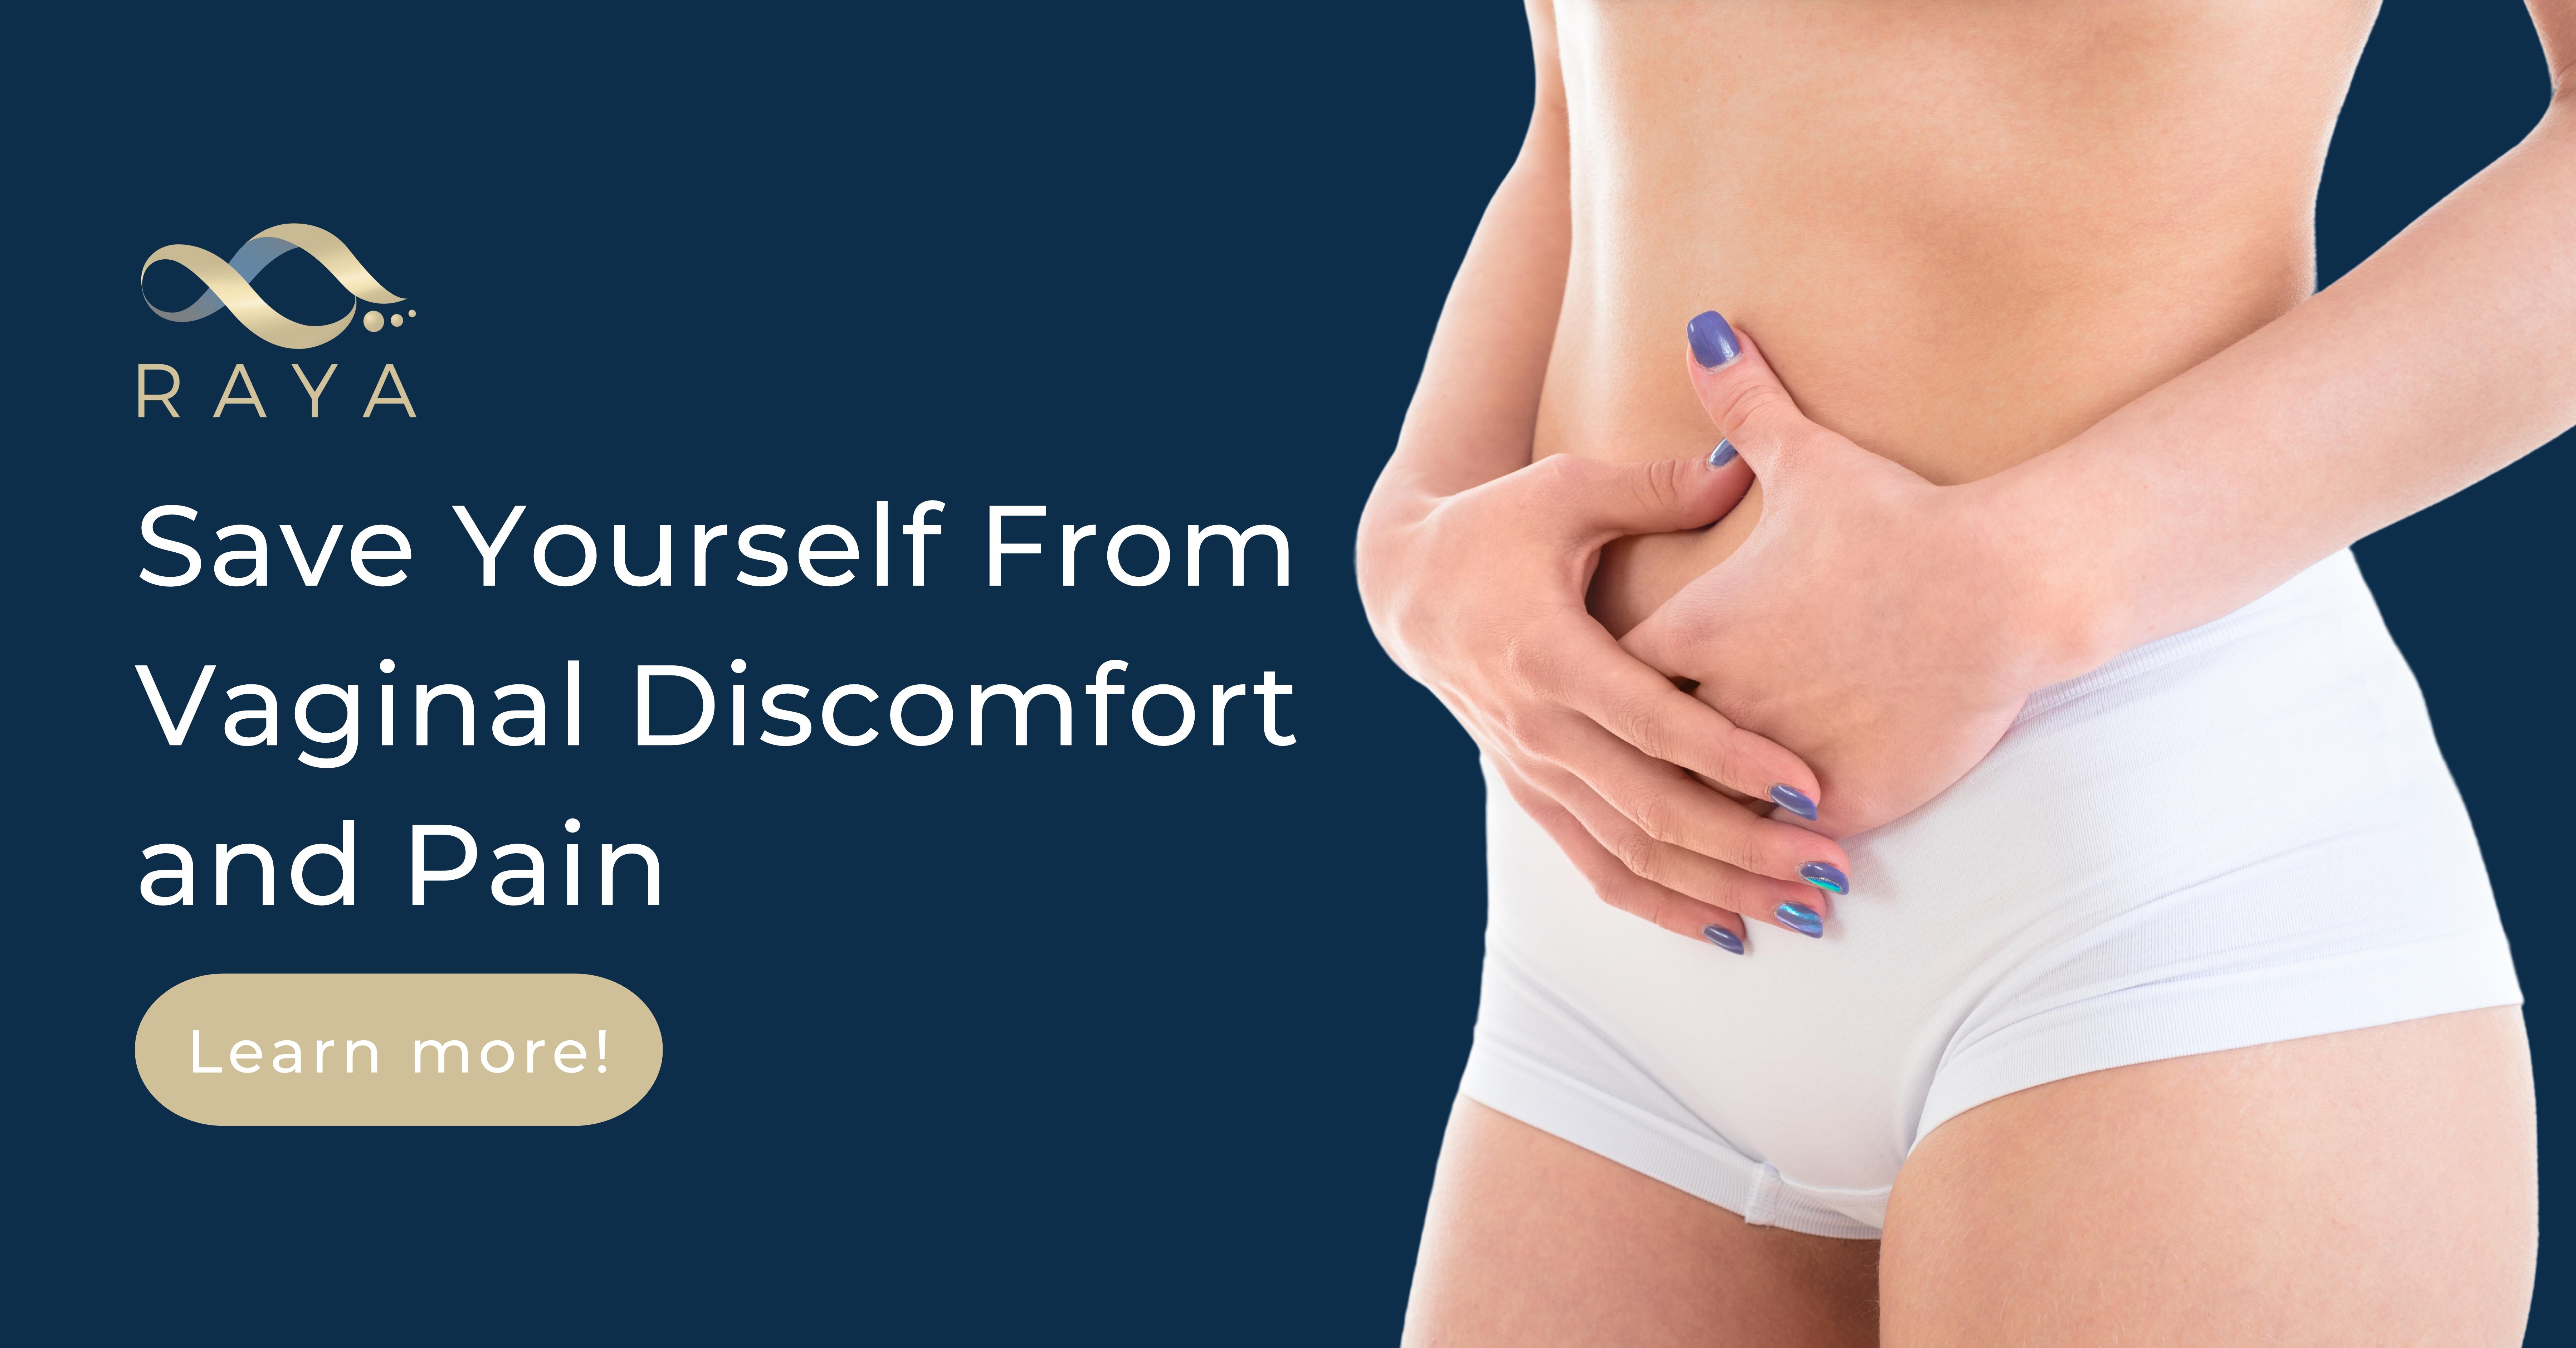 Save Yourself From Vaginal Discomfort and Pain: Learn more!